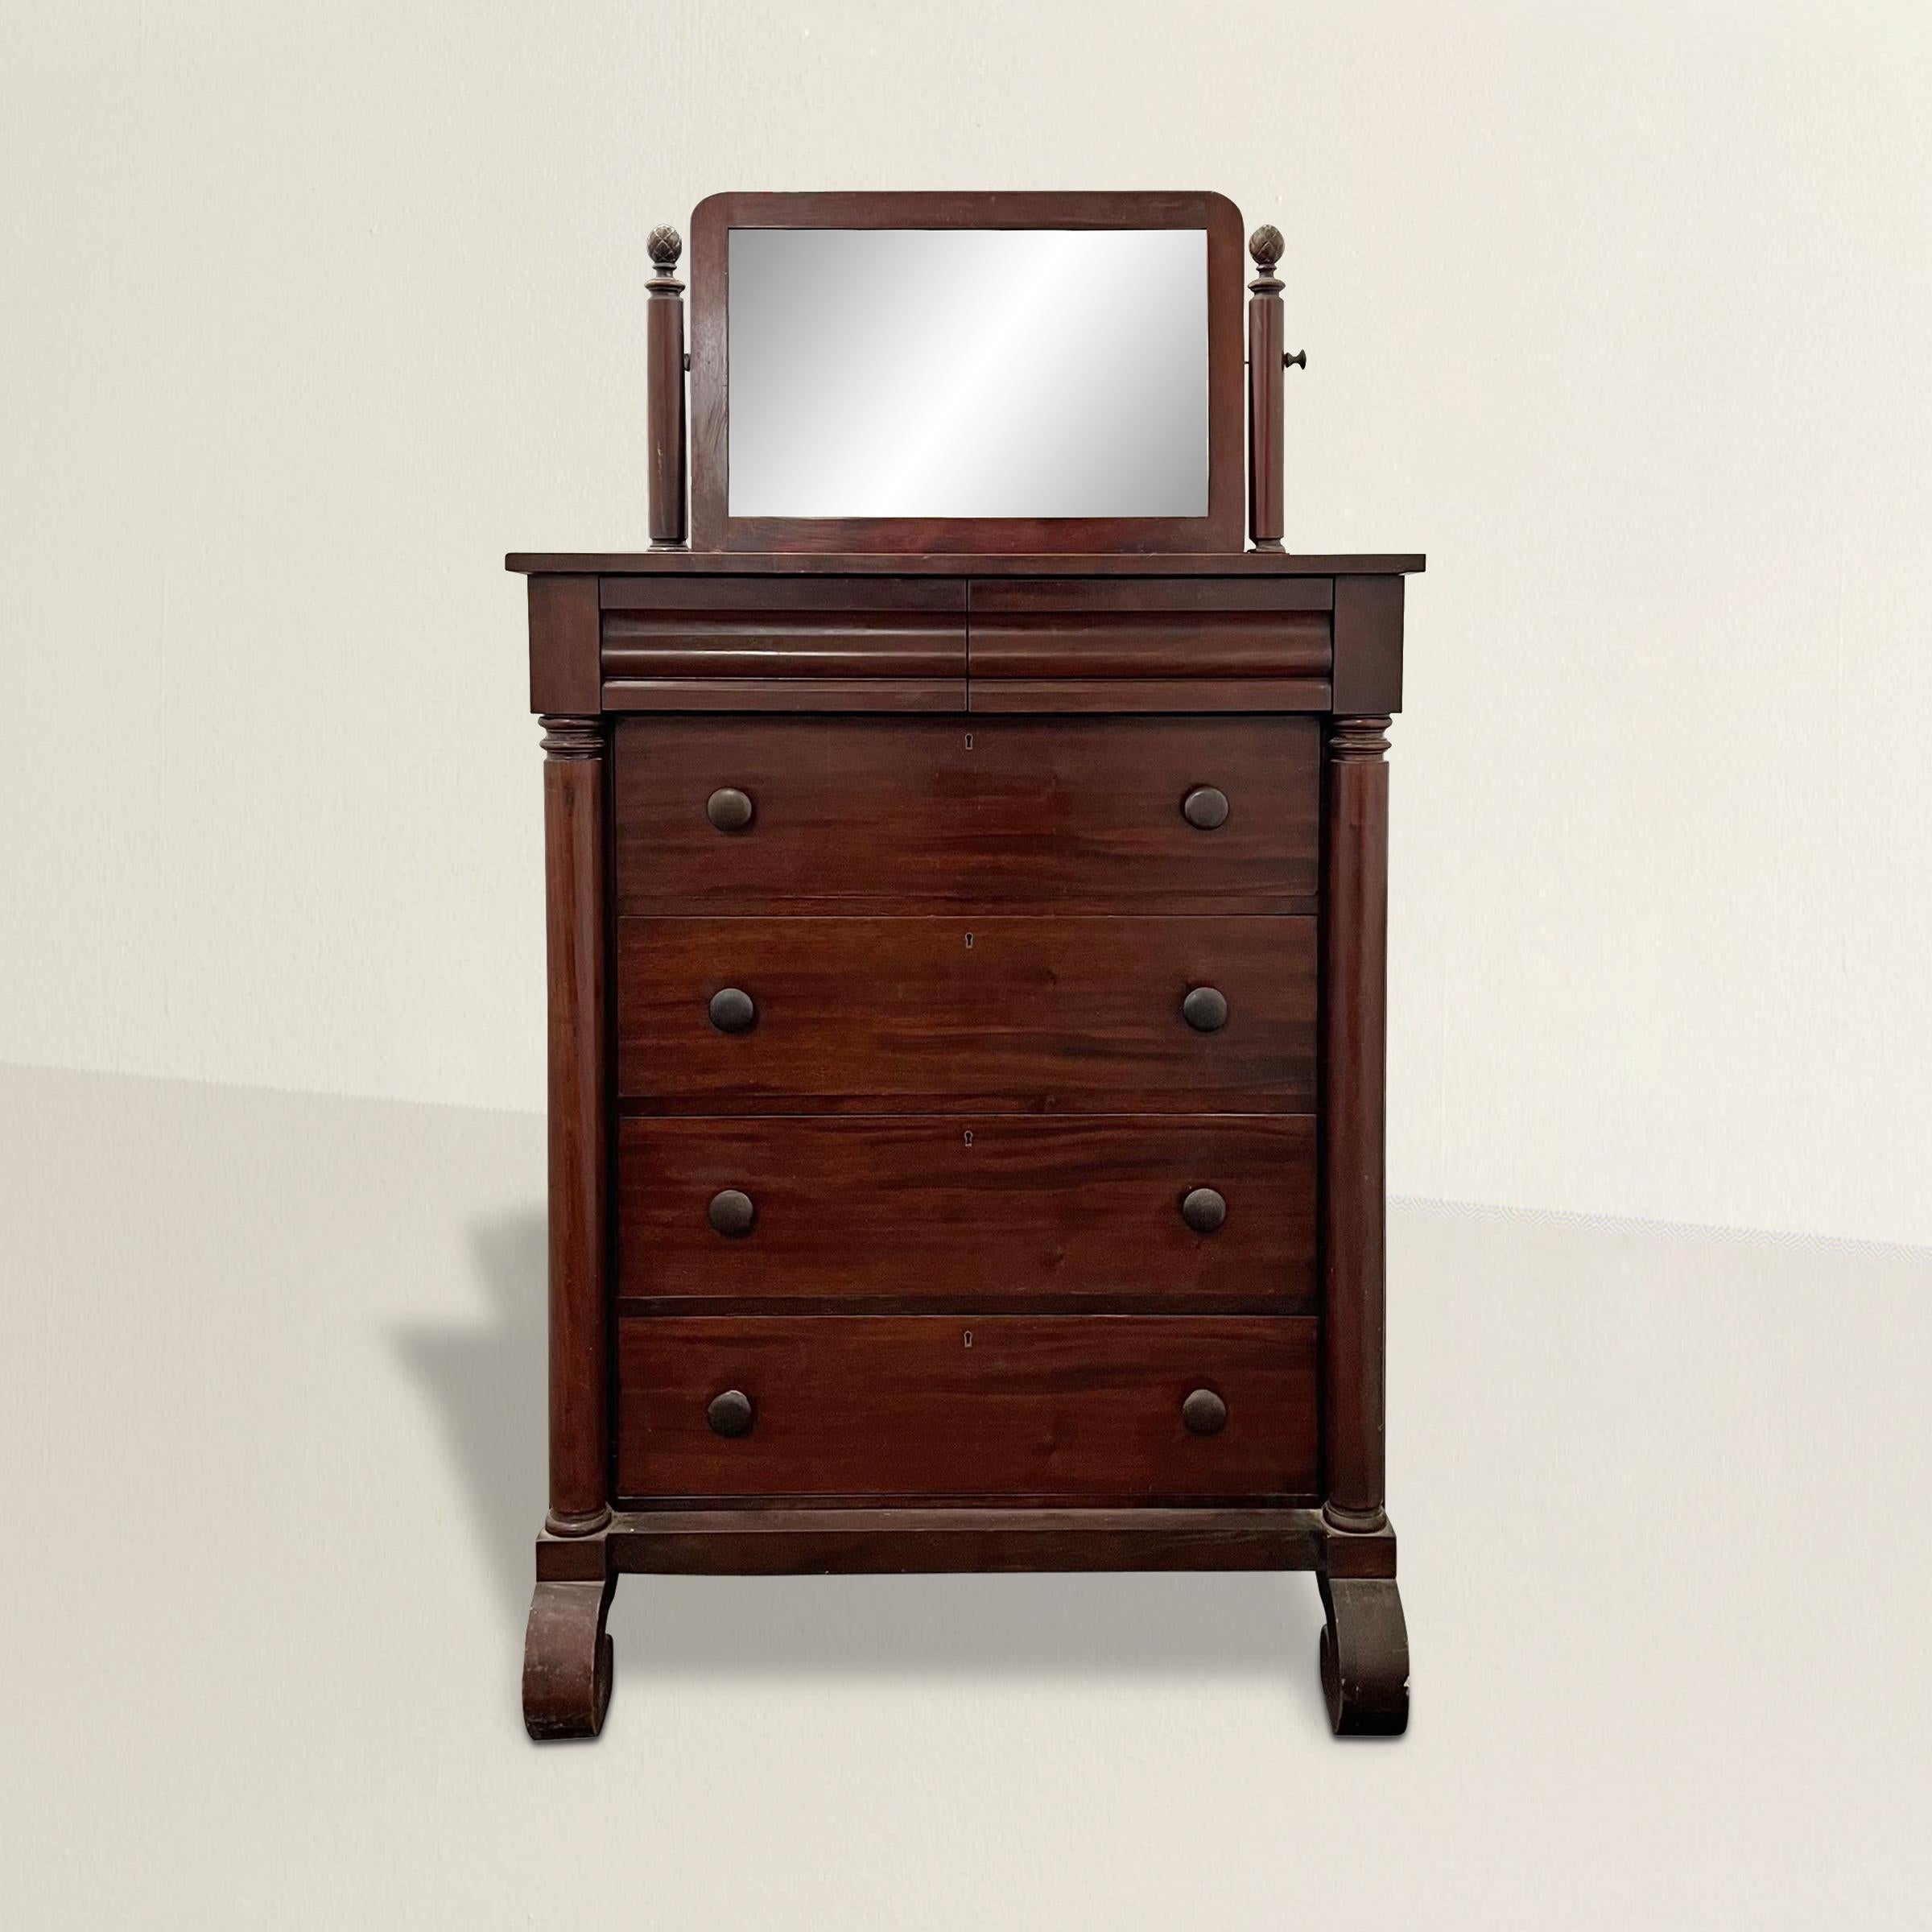 A handsome and robust late 19th century American Empire-style mahogany veneer chest of drawers with swivel vanity mirror, and two small drawers over four large drawers, made by the Cowan Furniture Company of Chicago. The perfect dresser in the guest